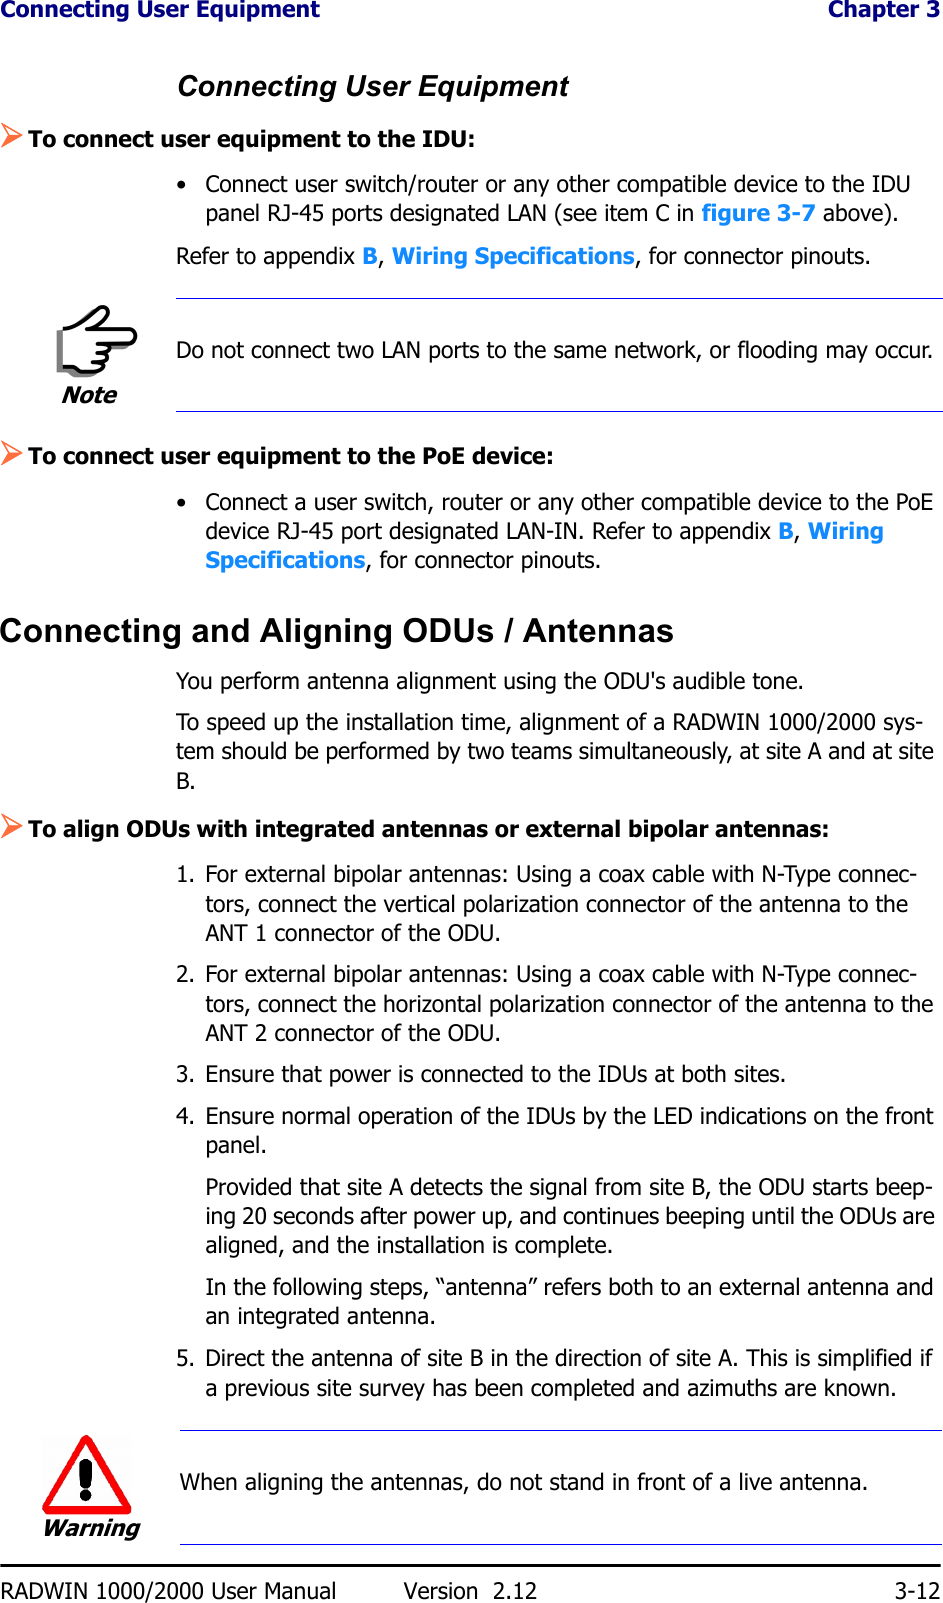 Connecting User Equipment  Chapter 3RADWIN 1000/2000 User Manual Version  2.12 3-12Connecting User Equipment¾To connect user equipment to the IDU:• Connect user switch/router or any other compatible device to the IDU panel RJ-45 ports designated LAN (see item C in figure 3-7 above).Refer to appendix B, Wiring Specifications, for connector pinouts.¾To connect user equipment to the PoE device:• Connect a user switch, router or any other compatible device to the PoE device RJ-45 port designated LAN-IN. Refer to appendix B, Wiring Specifications, for connector pinouts.Connecting and Aligning ODUs / AntennasYou perform antenna alignment using the ODU&apos;s audible tone.To speed up the installation time, alignment of a RADWIN 1000/2000 sys-tem should be performed by two teams simultaneously, at site A and at site B.¾To align ODUs with integrated antennas or external bipolar antennas:1. For external bipolar antennas: Using a coax cable with N-Type connec-tors, connect the vertical polarization connector of the antenna to the ANT 1 connector of the ODU.2. For external bipolar antennas: Using a coax cable with N-Type connec-tors, connect the horizontal polarization connector of the antenna to the ANT 2 connector of the ODU.3. Ensure that power is connected to the IDUs at both sites.4. Ensure normal operation of the IDUs by the LED indications on the front panel.Provided that site A detects the signal from site B, the ODU starts beep-ing 20 seconds after power up, and continues beeping until the ODUs are aligned, and the installation is complete.In the following steps, “antenna” refers both to an external antenna and an integrated antenna.5. Direct the antenna of site B in the direction of site A. This is simplified if a previous site survey has been completed and azimuths are known.NoteDo not connect two LAN ports to the same network, or flooding may occur.WarningWhen aligning the antennas, do not stand in front of a live antenna.